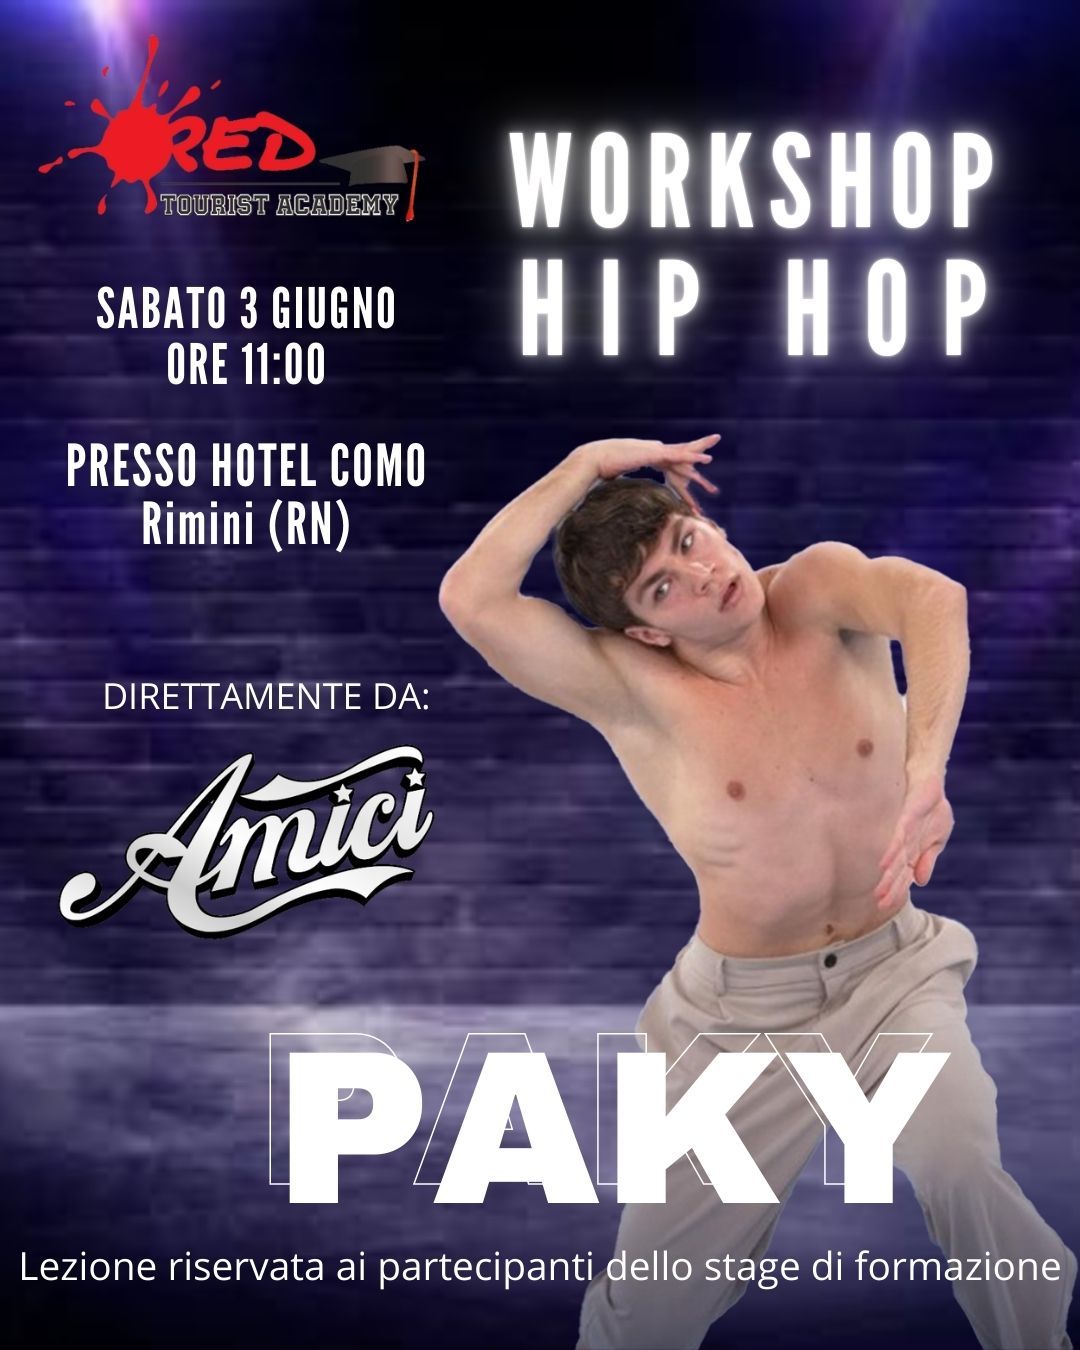 WORKSHOP HIP HOP BY PAKY